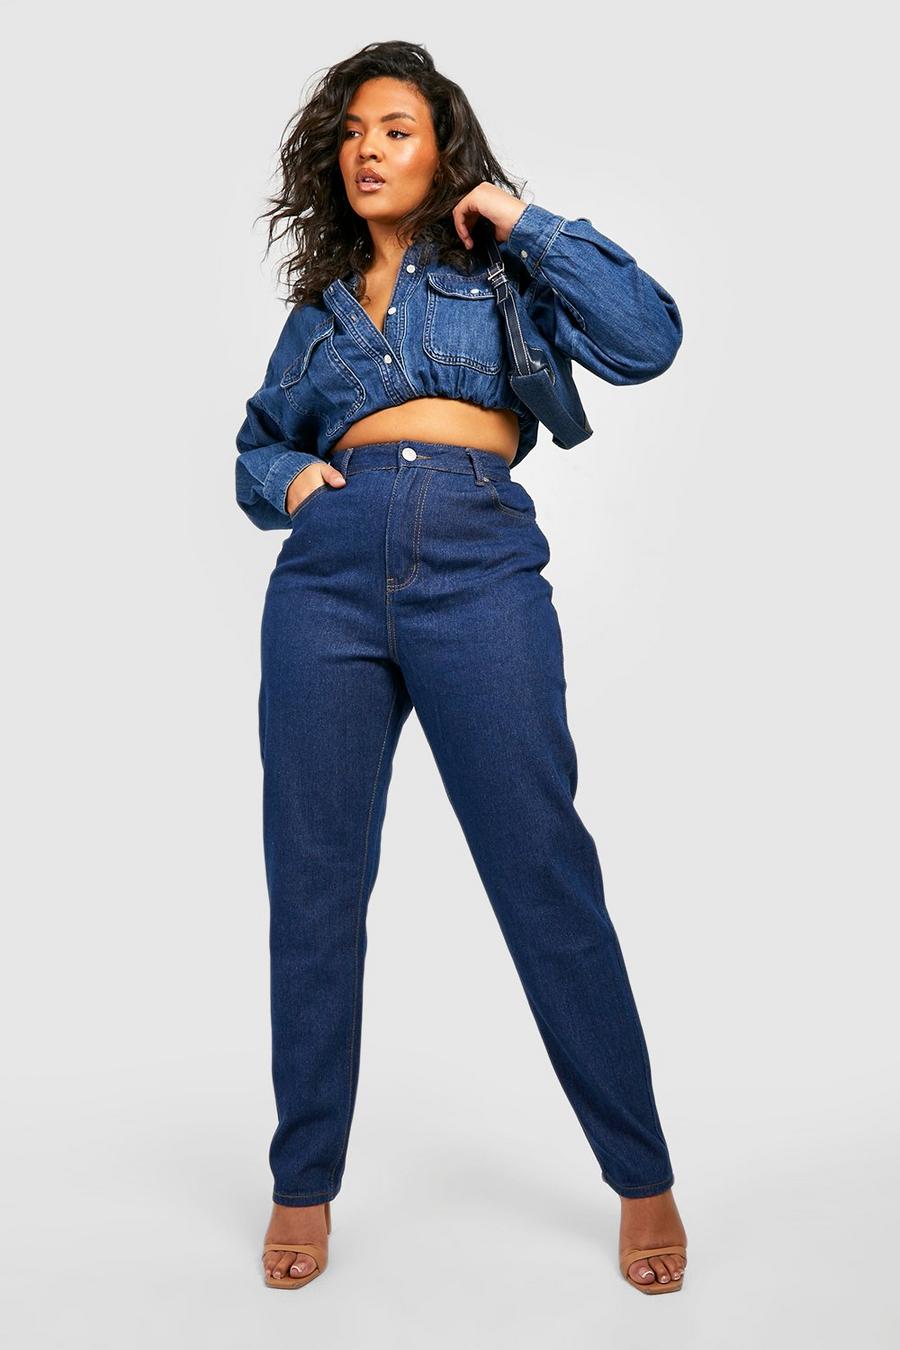 Plus Size High Waisted Jeans, Plus Size High Rise Jeans